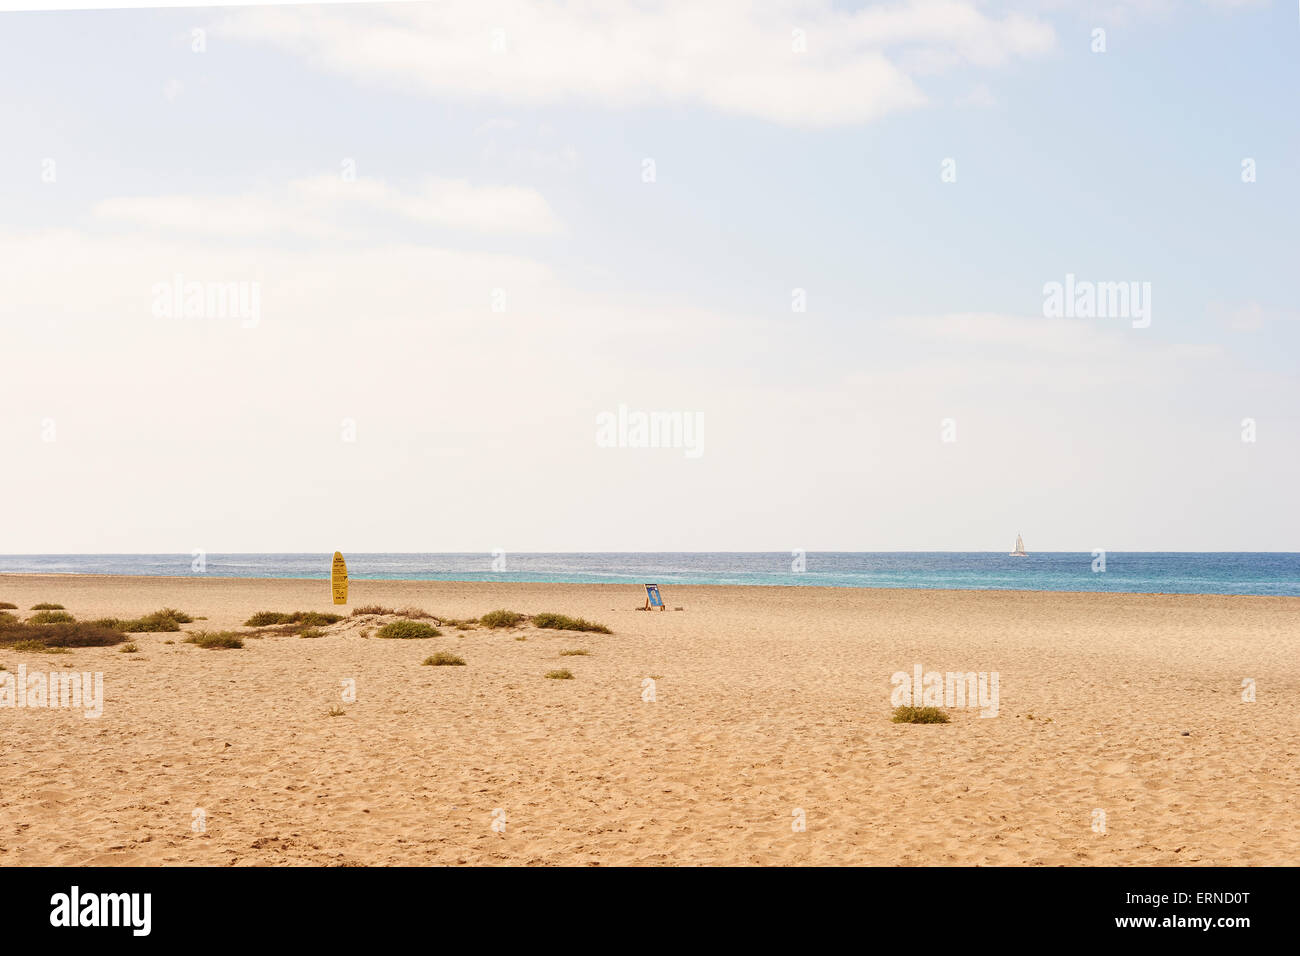 View of surfboard looking out to Atlantic from beach on Sal, Cape Verde Stock Photo